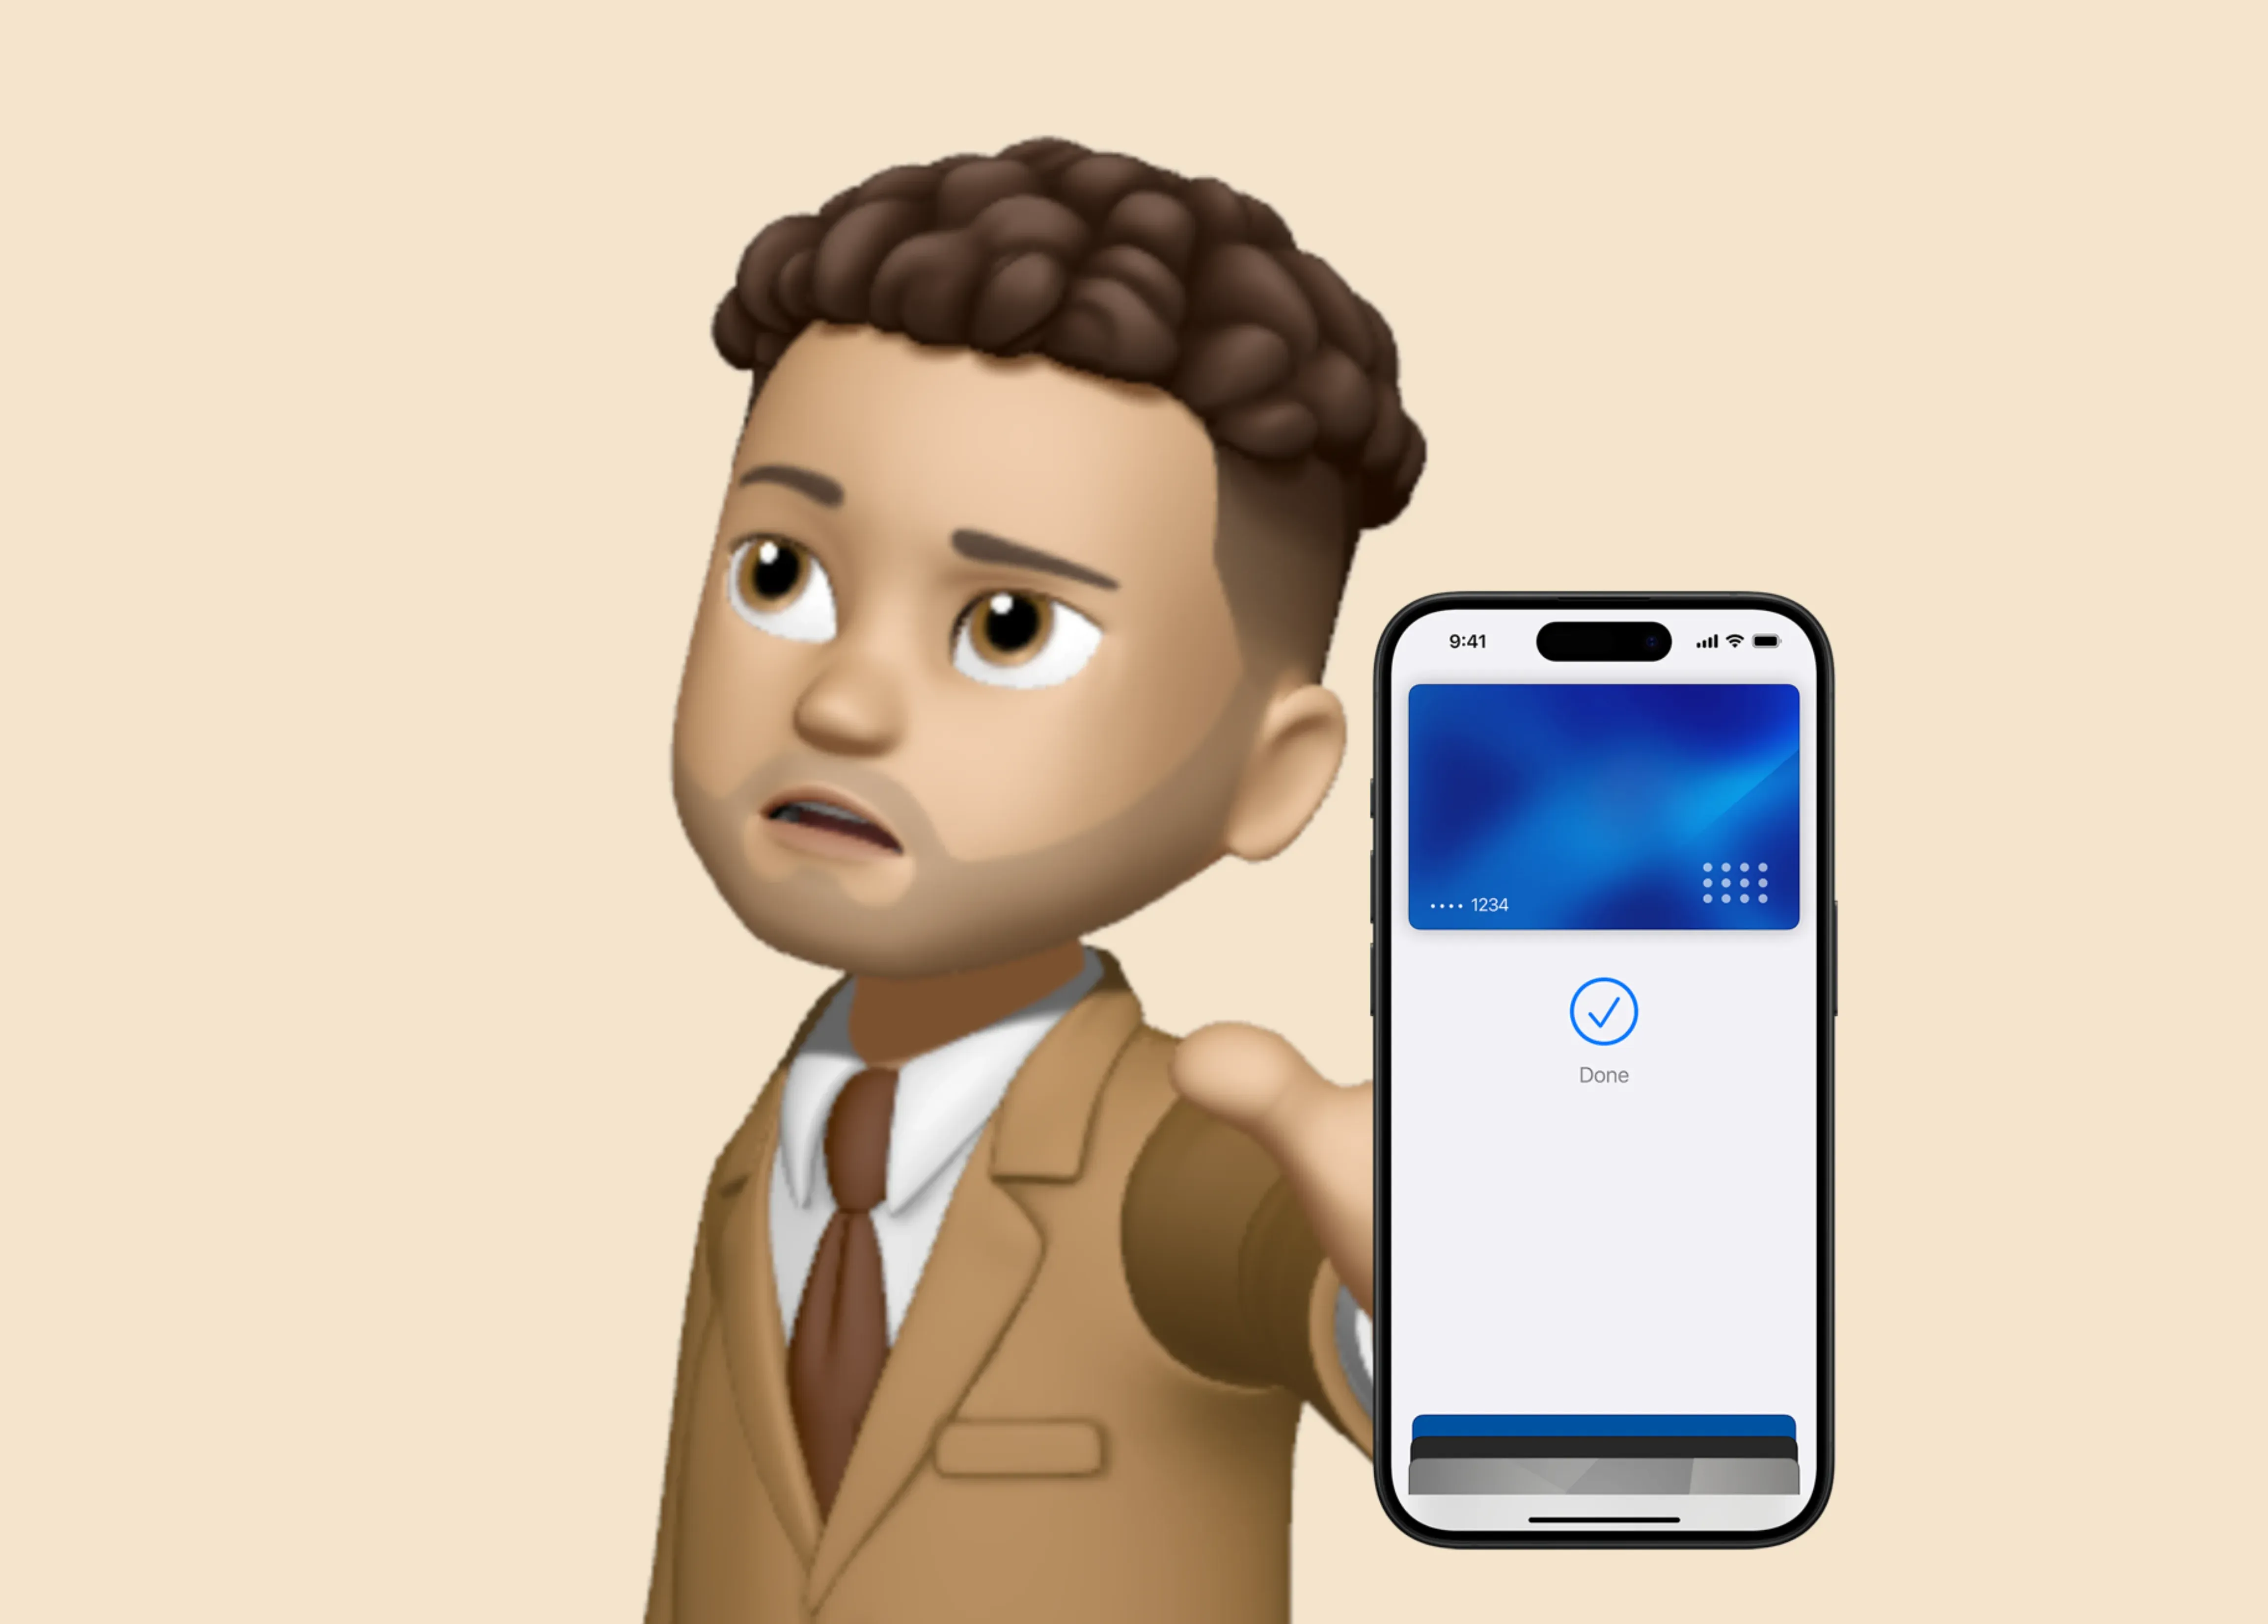 Memoji with an iPhone using Apple Pay